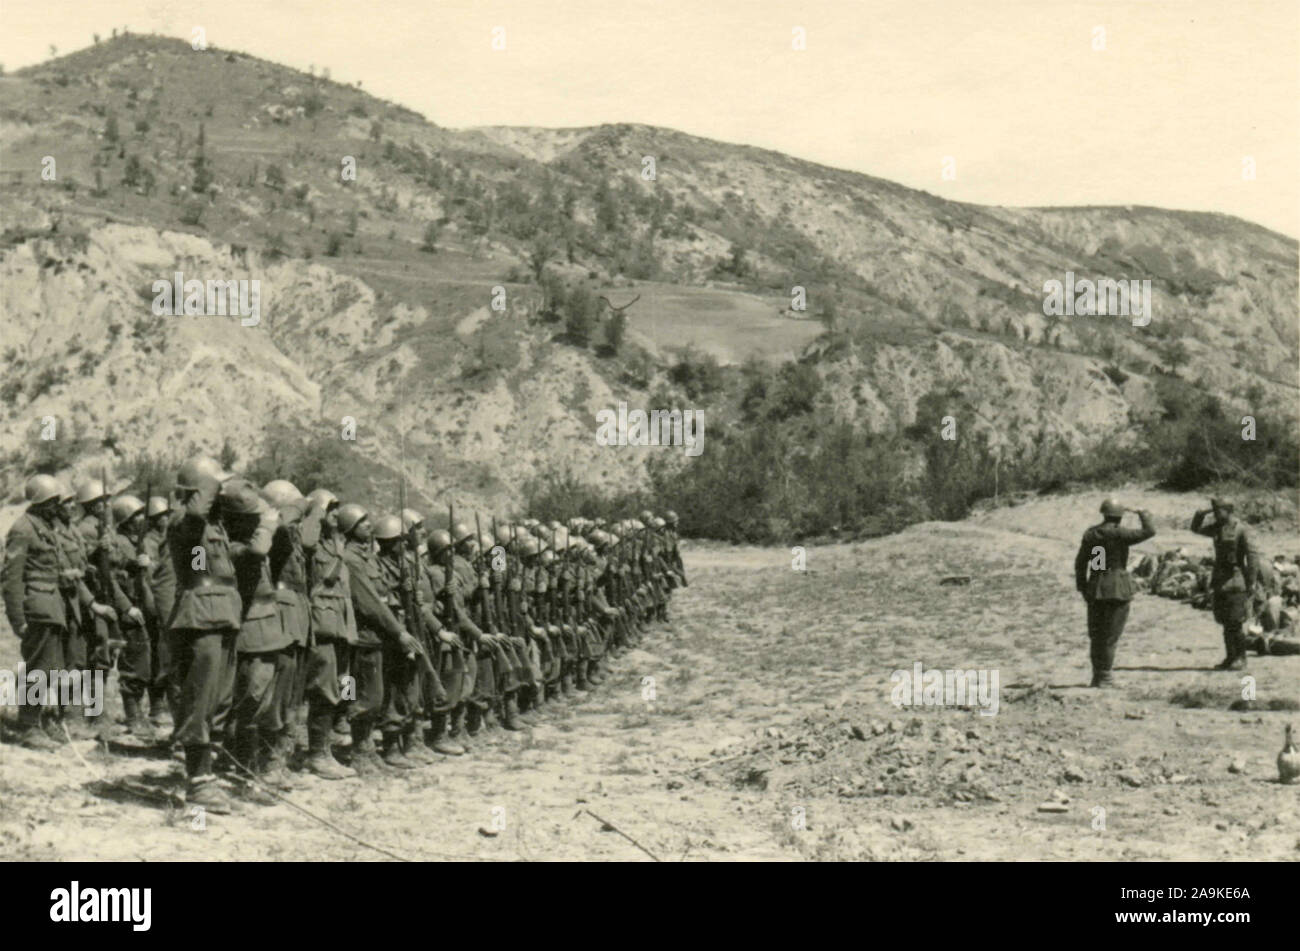 The Troops Of The Italian Army In Albania During The Campaign To